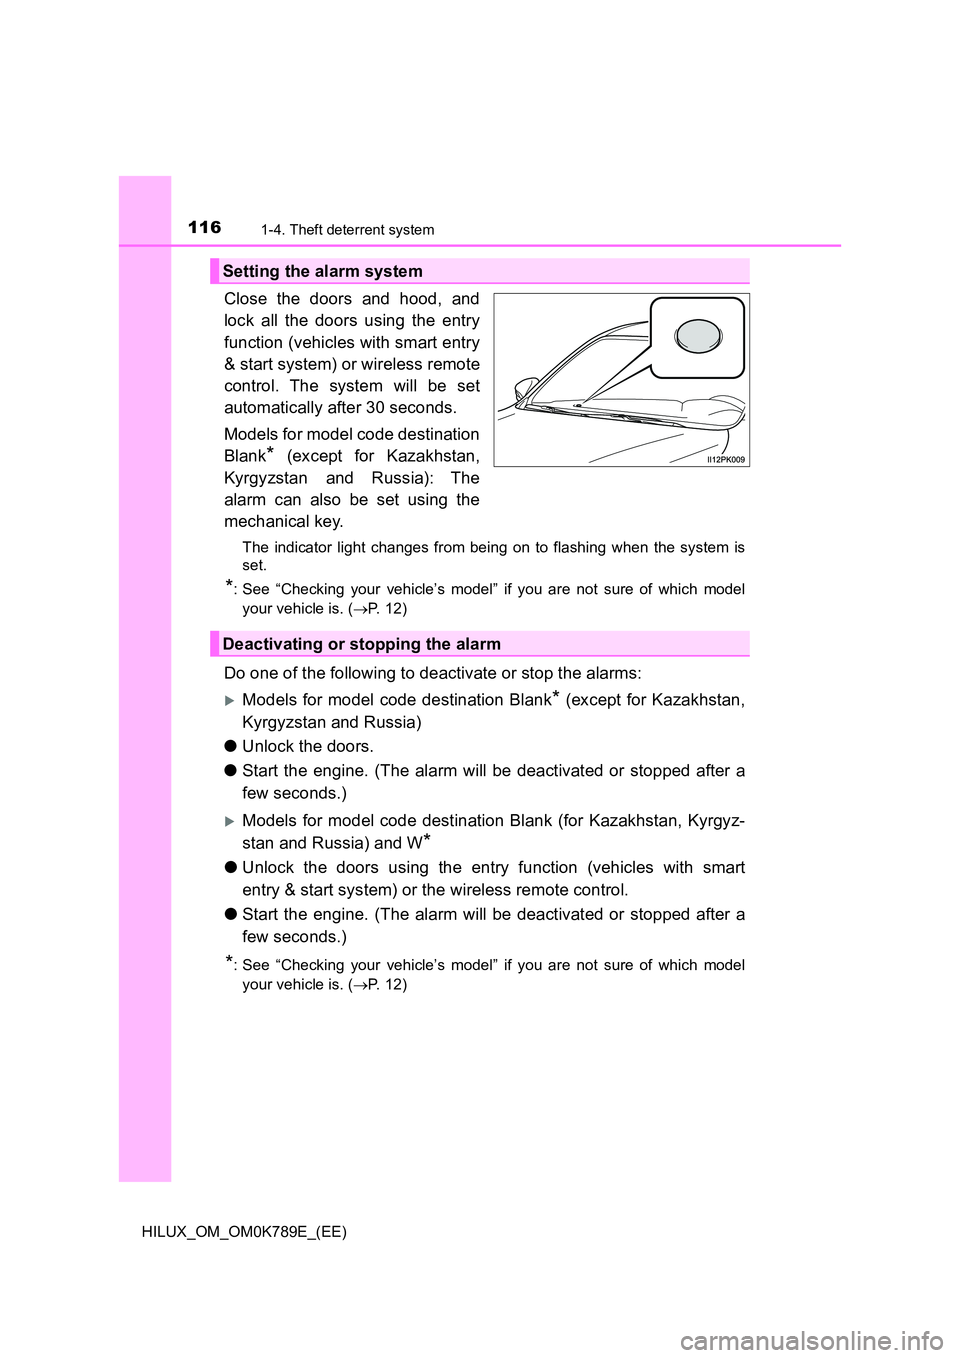 TOYOTA HILUX 2023  Owners Manual 1161-4. Theft deterrent system
HILUX_OM_OM0K789E_(EE)
Close the doors and hood, and 
lock all the doors using the entry 
function (vehicles with smart entry 
& start system) or wireless remote 
contro